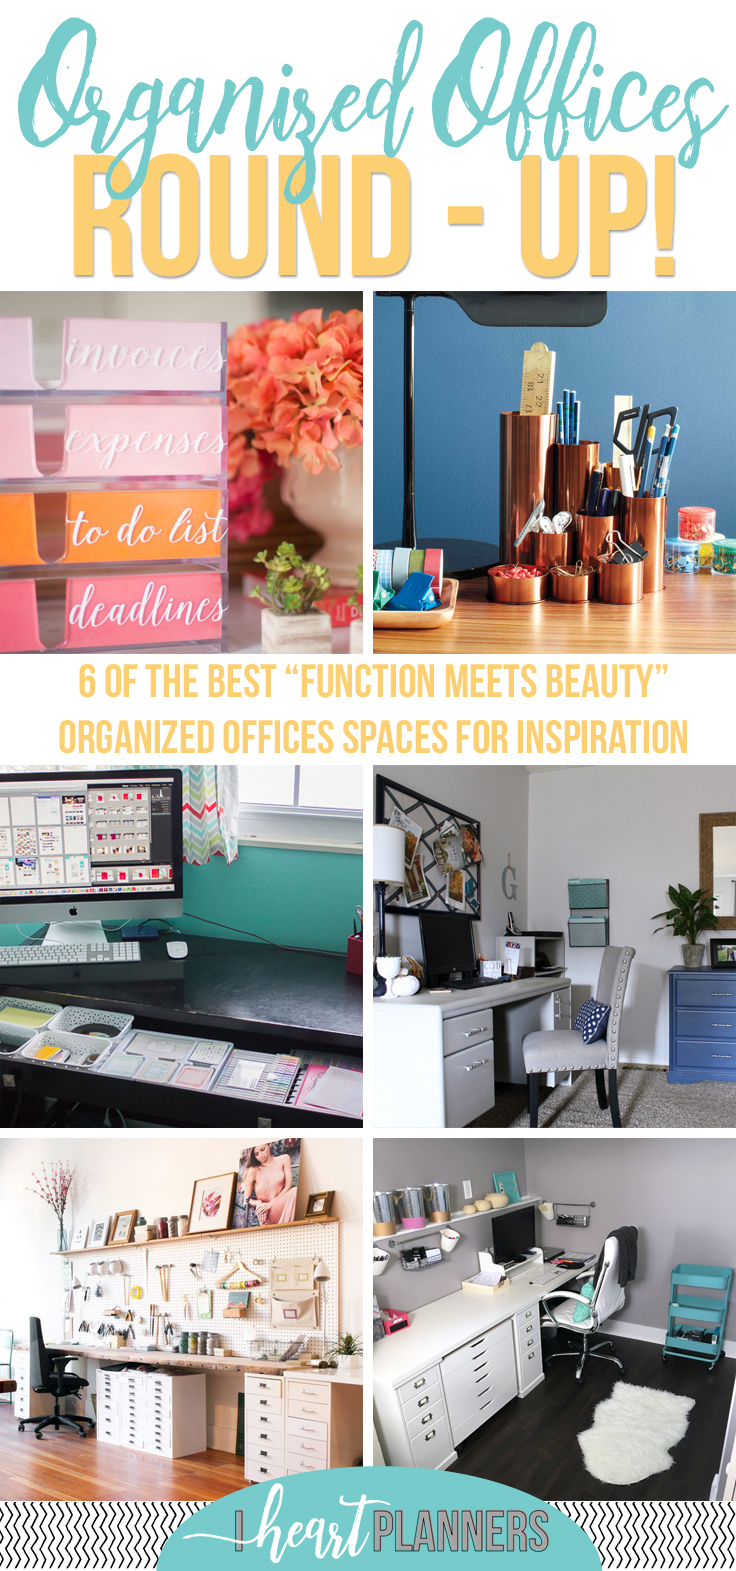 6 of the best "function meets beauty" organized office spaces for inspiration. - getorganizedhq.com